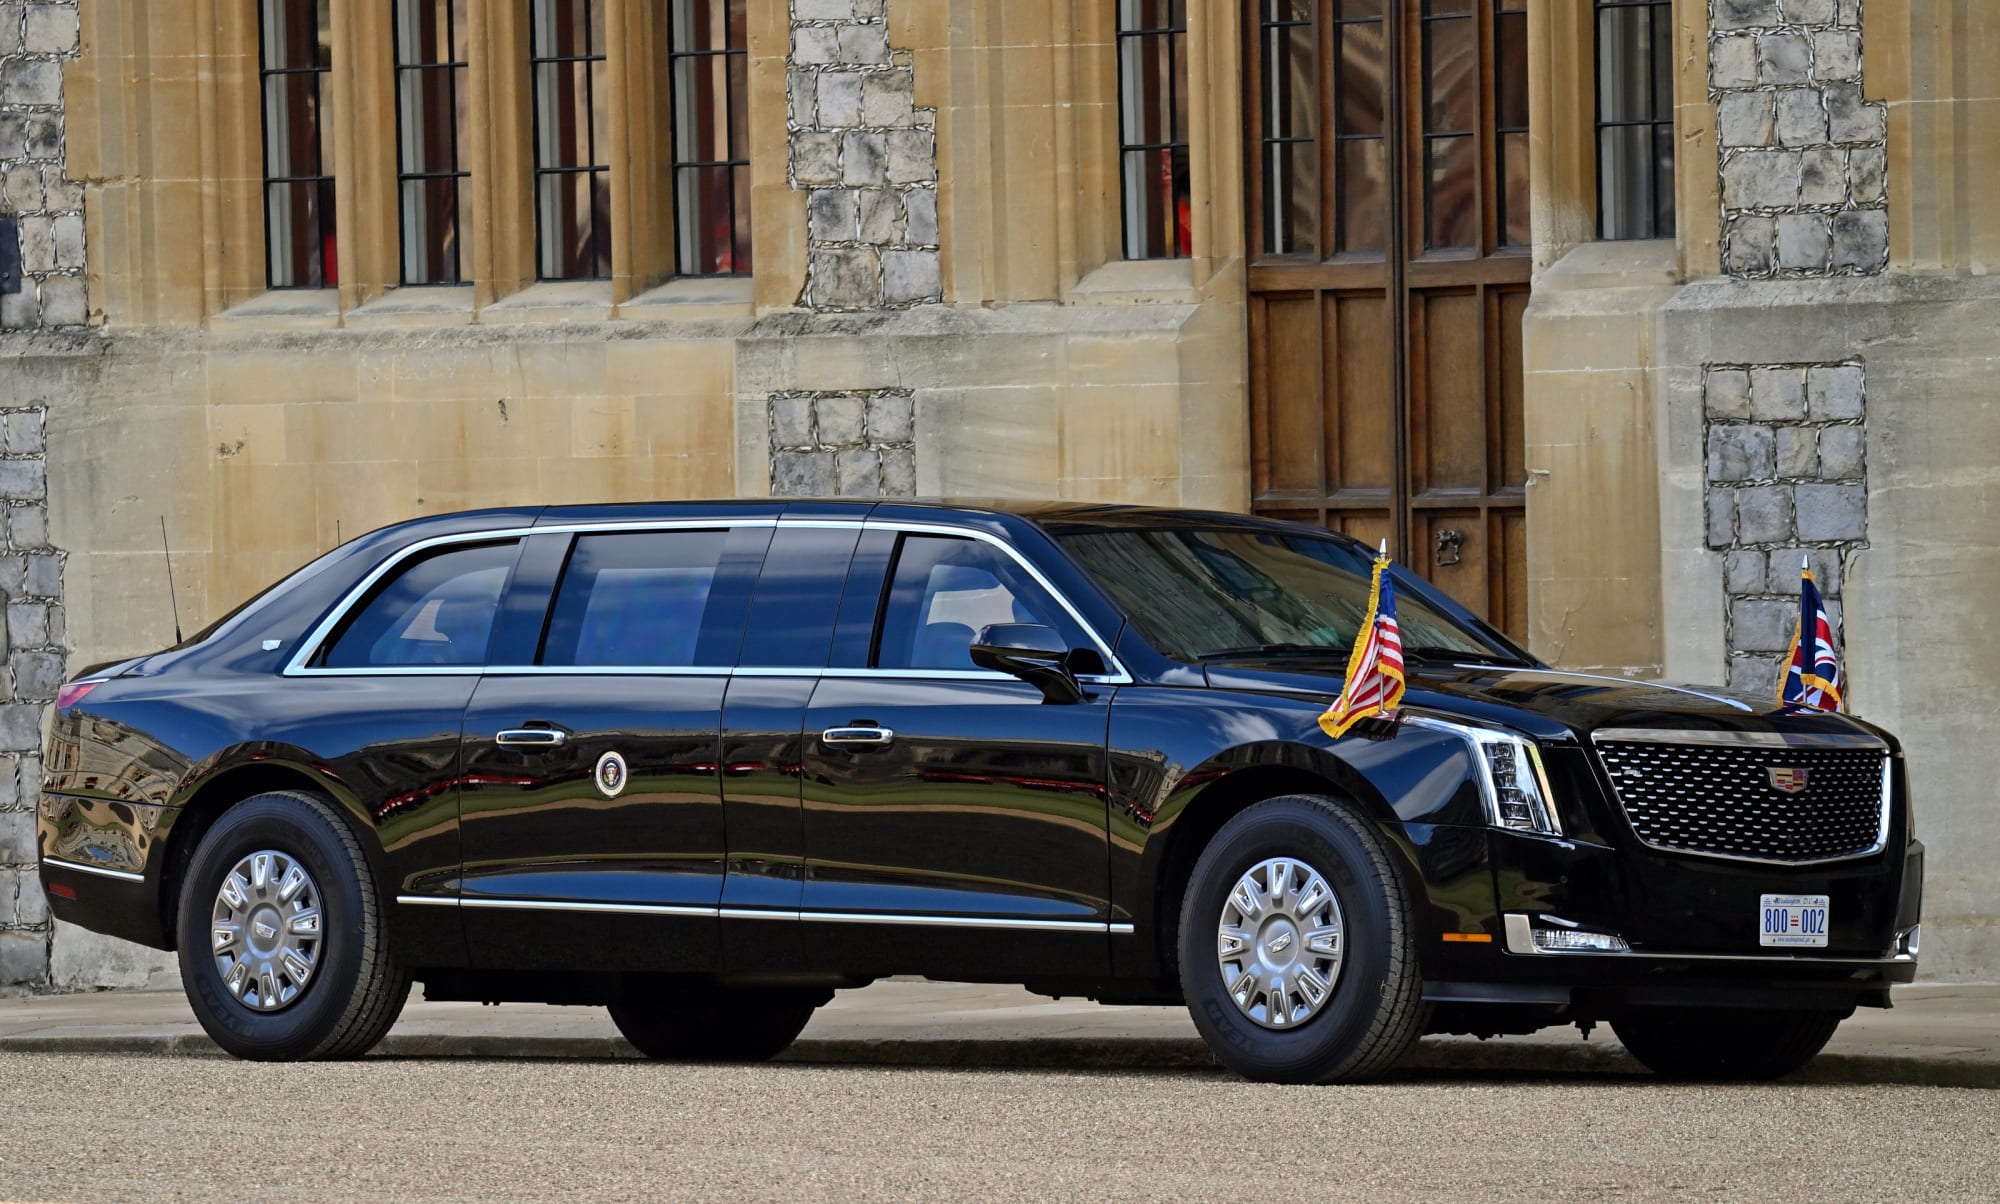 5 facts about the US Presidential Limousine: The Beast - Art of Gears